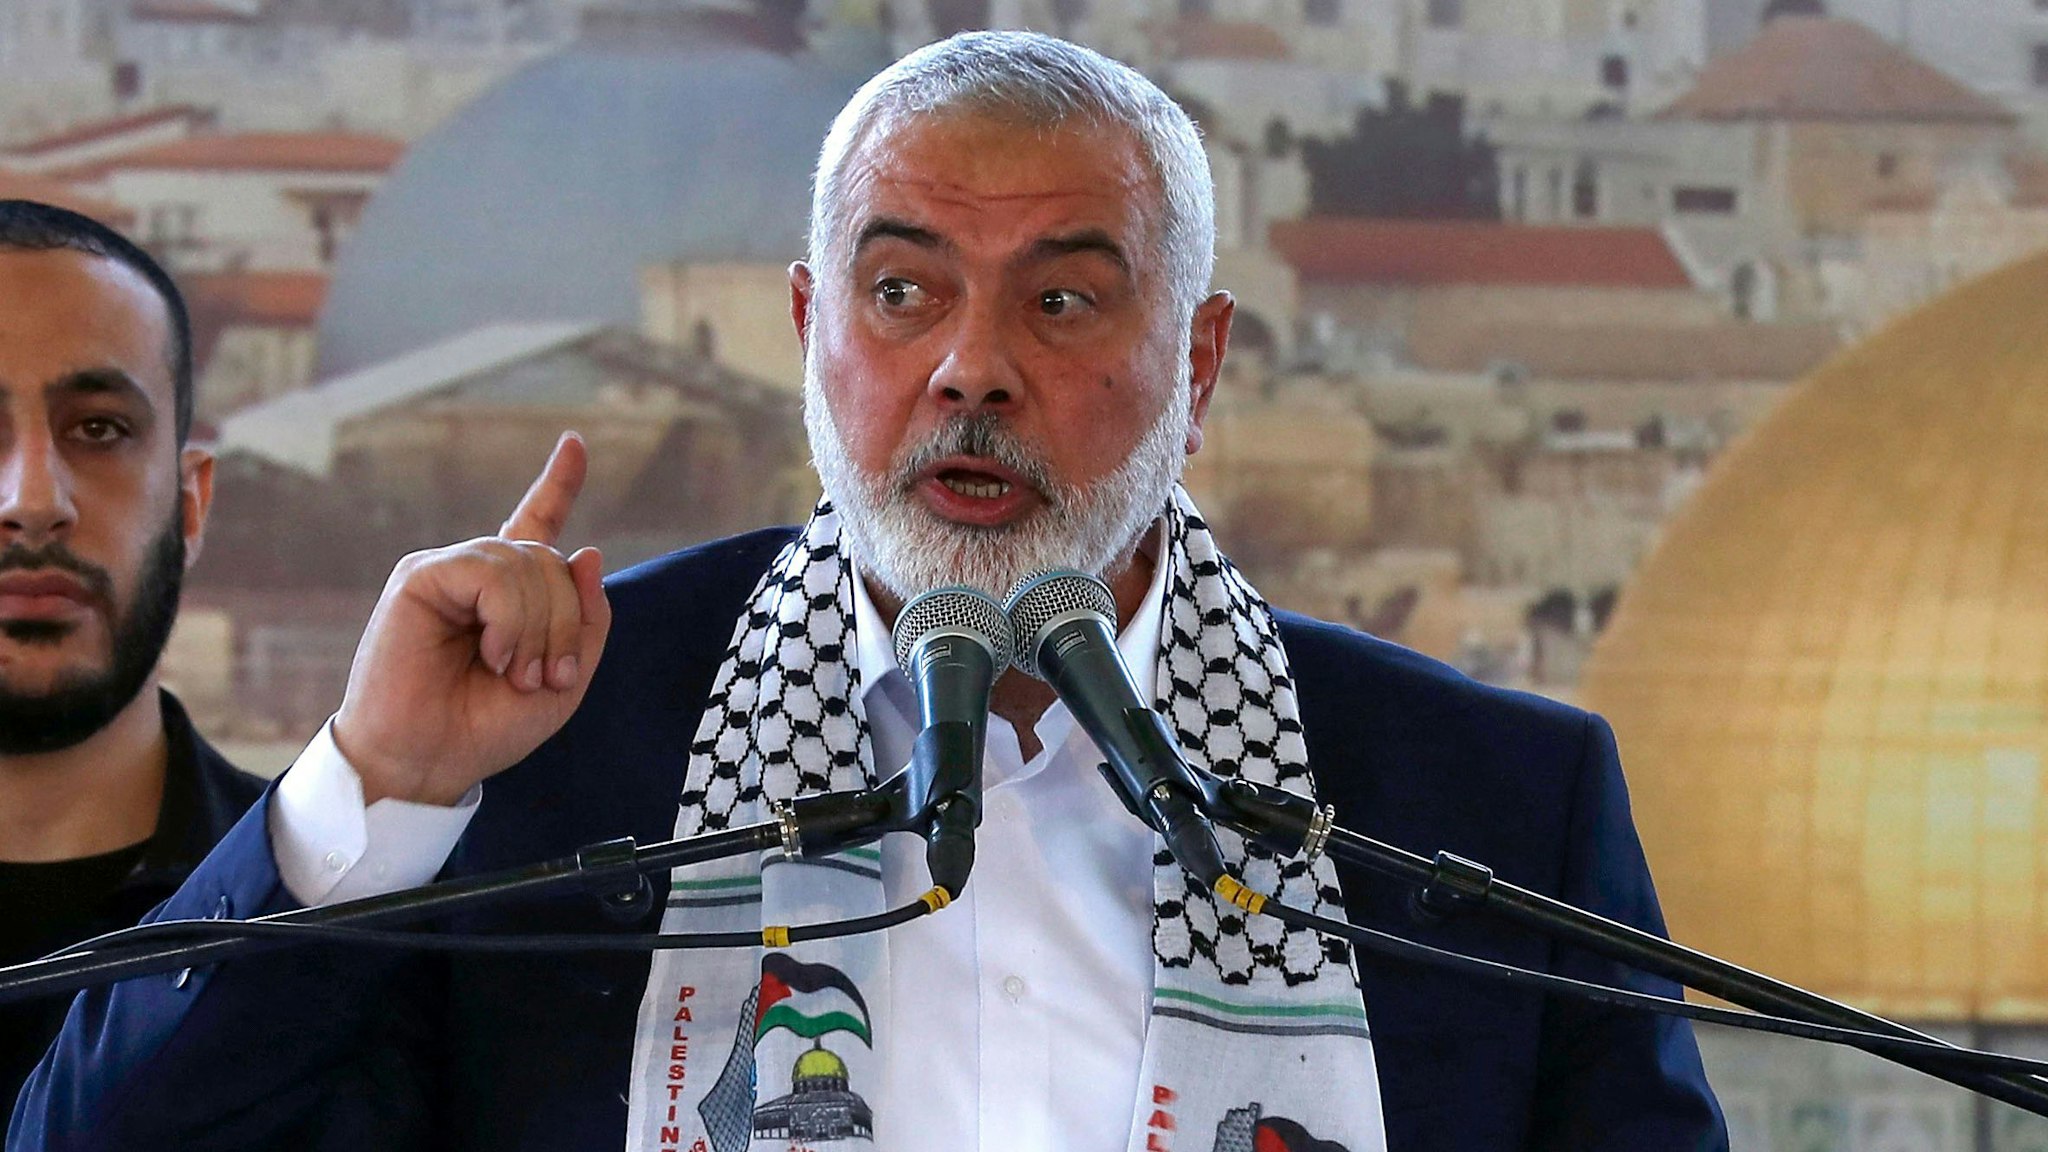 The Palestinian Hamas movement's leader Ismail Haniyeh speaks at a public rally during his visit to the southern Lebanese city of Saida, on June 26, 2022.